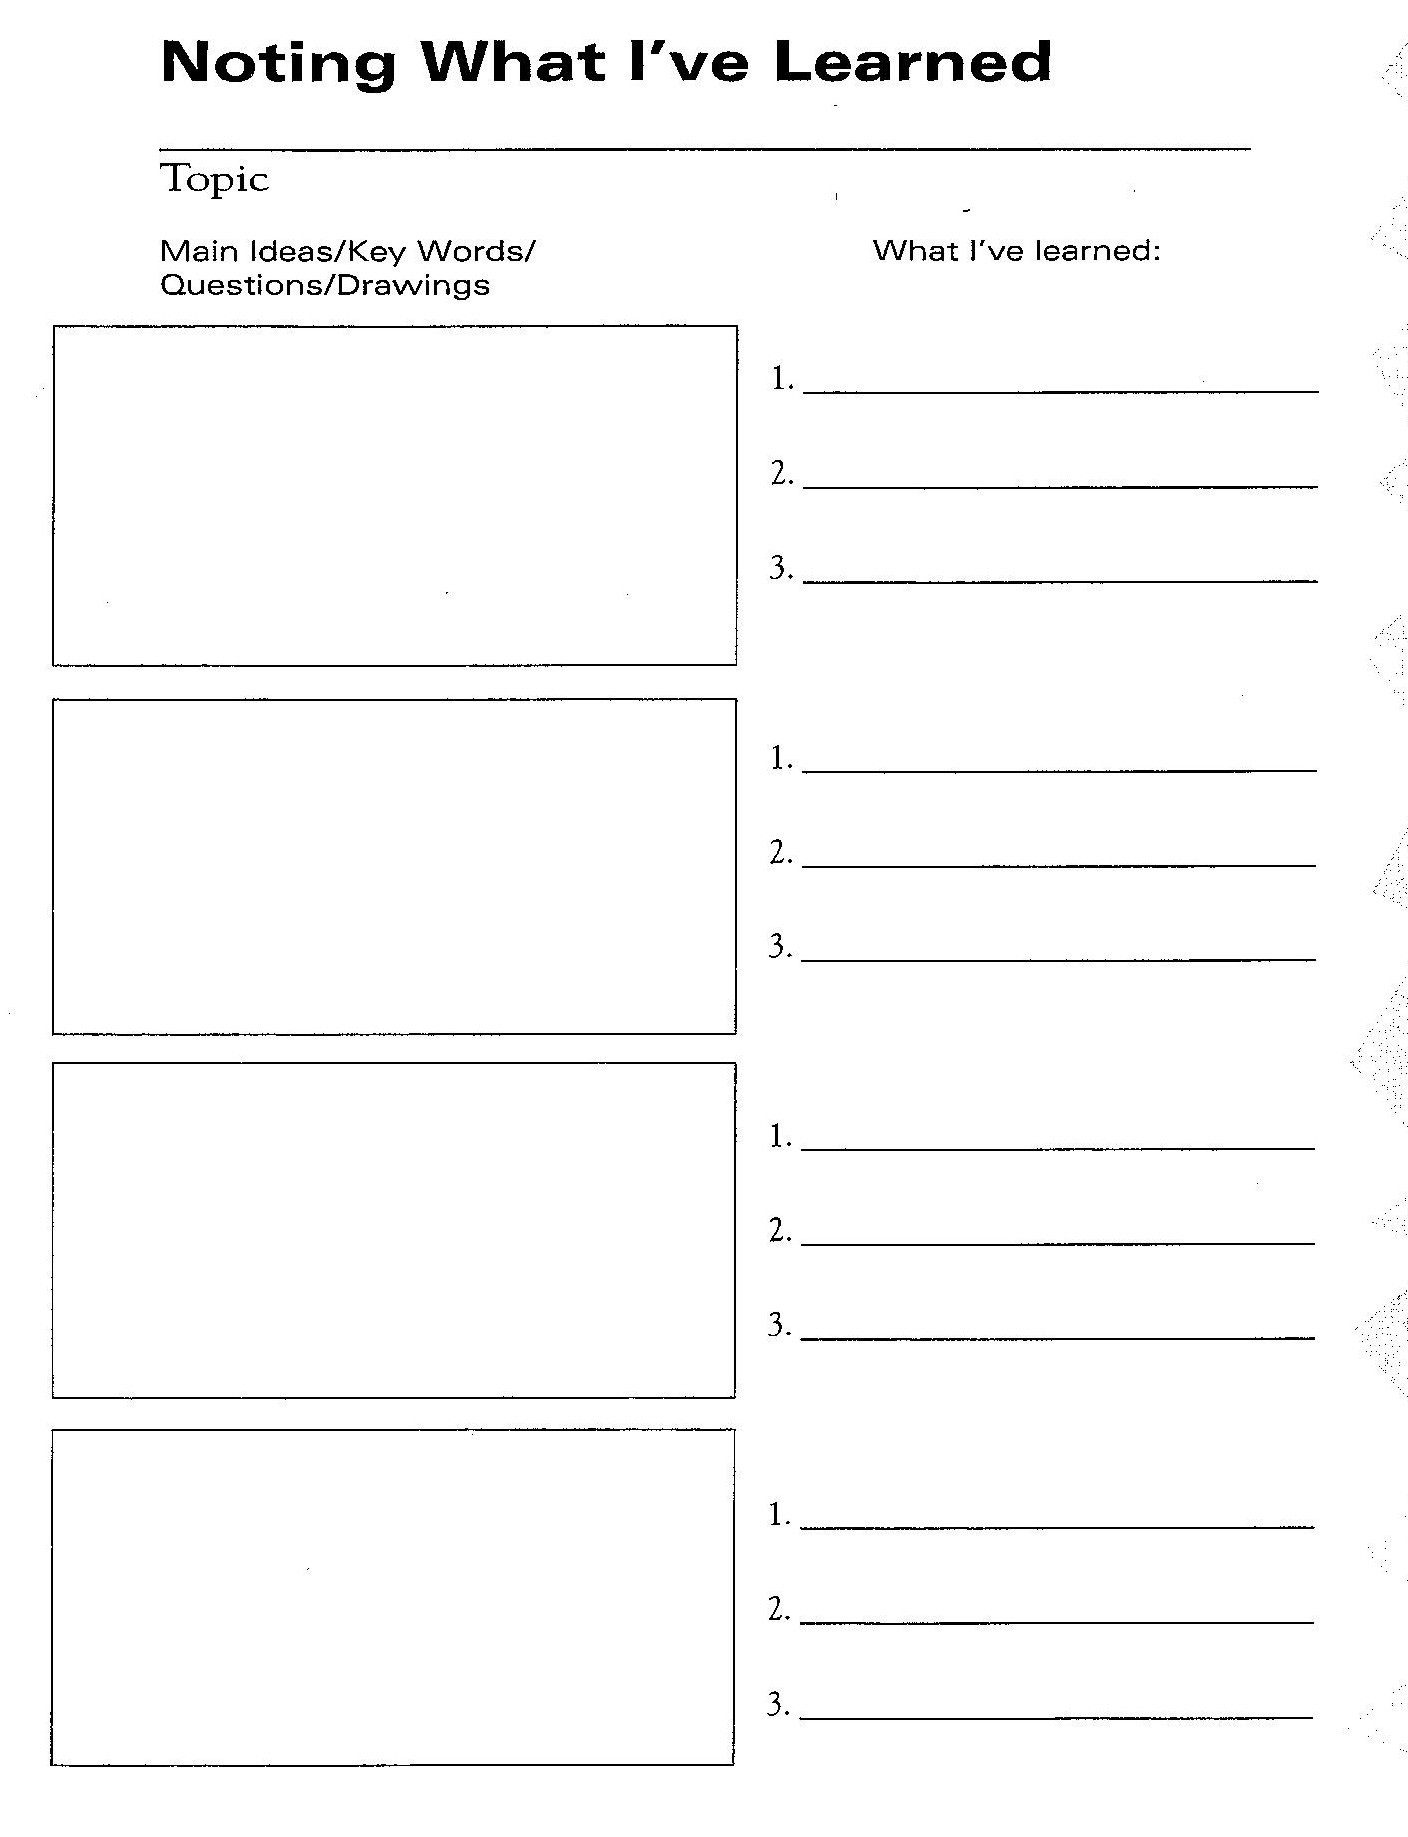 Study Notes Vocabulary Graphic Organizer Words To Use Study guide template microsoft word